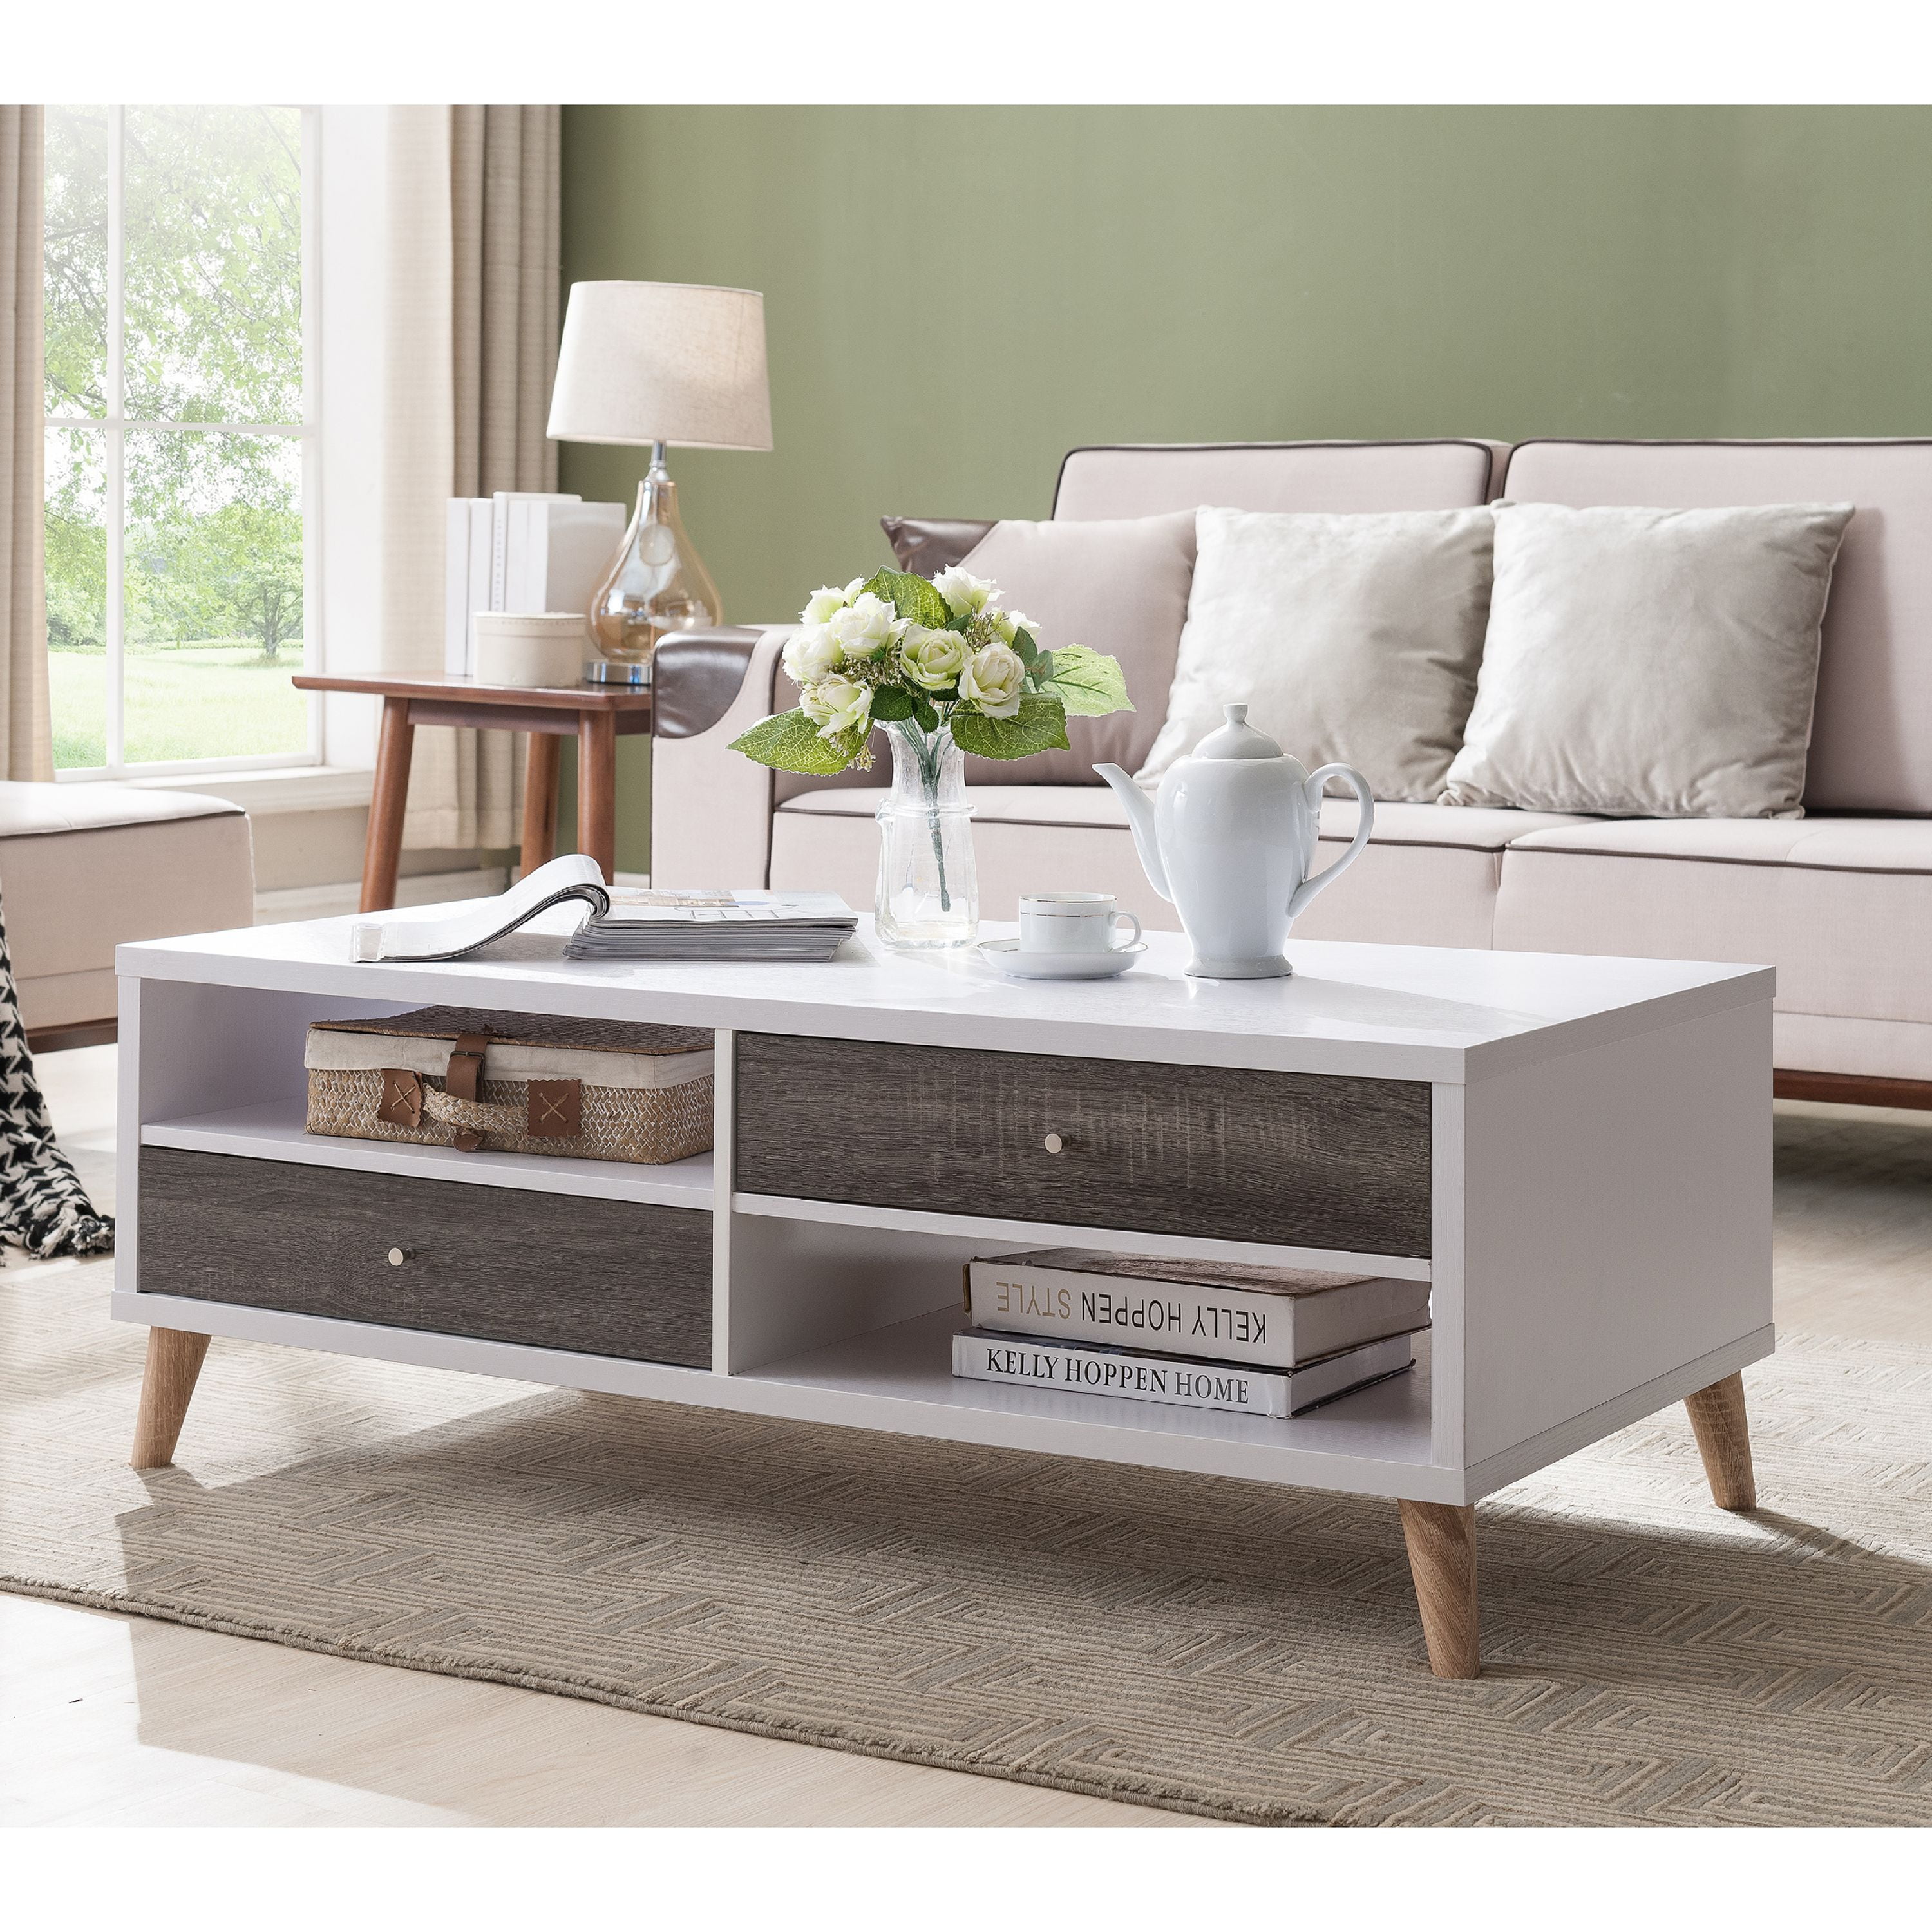 Featured image of post Distressed White And Grey Coffee Table - Get the best deals on scandinavian coffee tables.